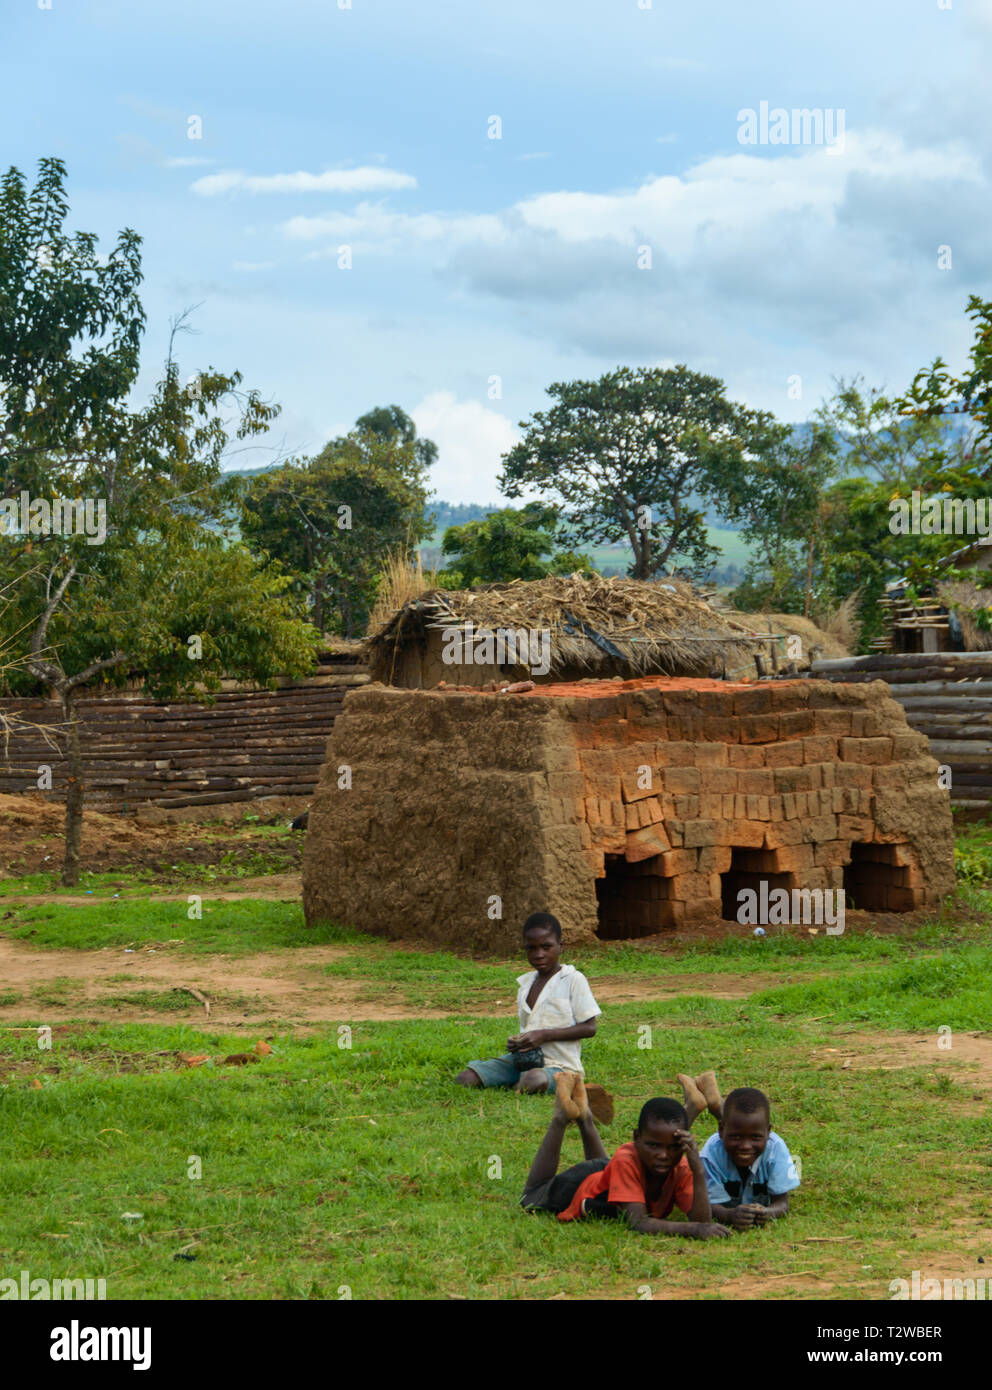 children lie on the ground in front of a small brick kiln in a Malawian village Stock Photo